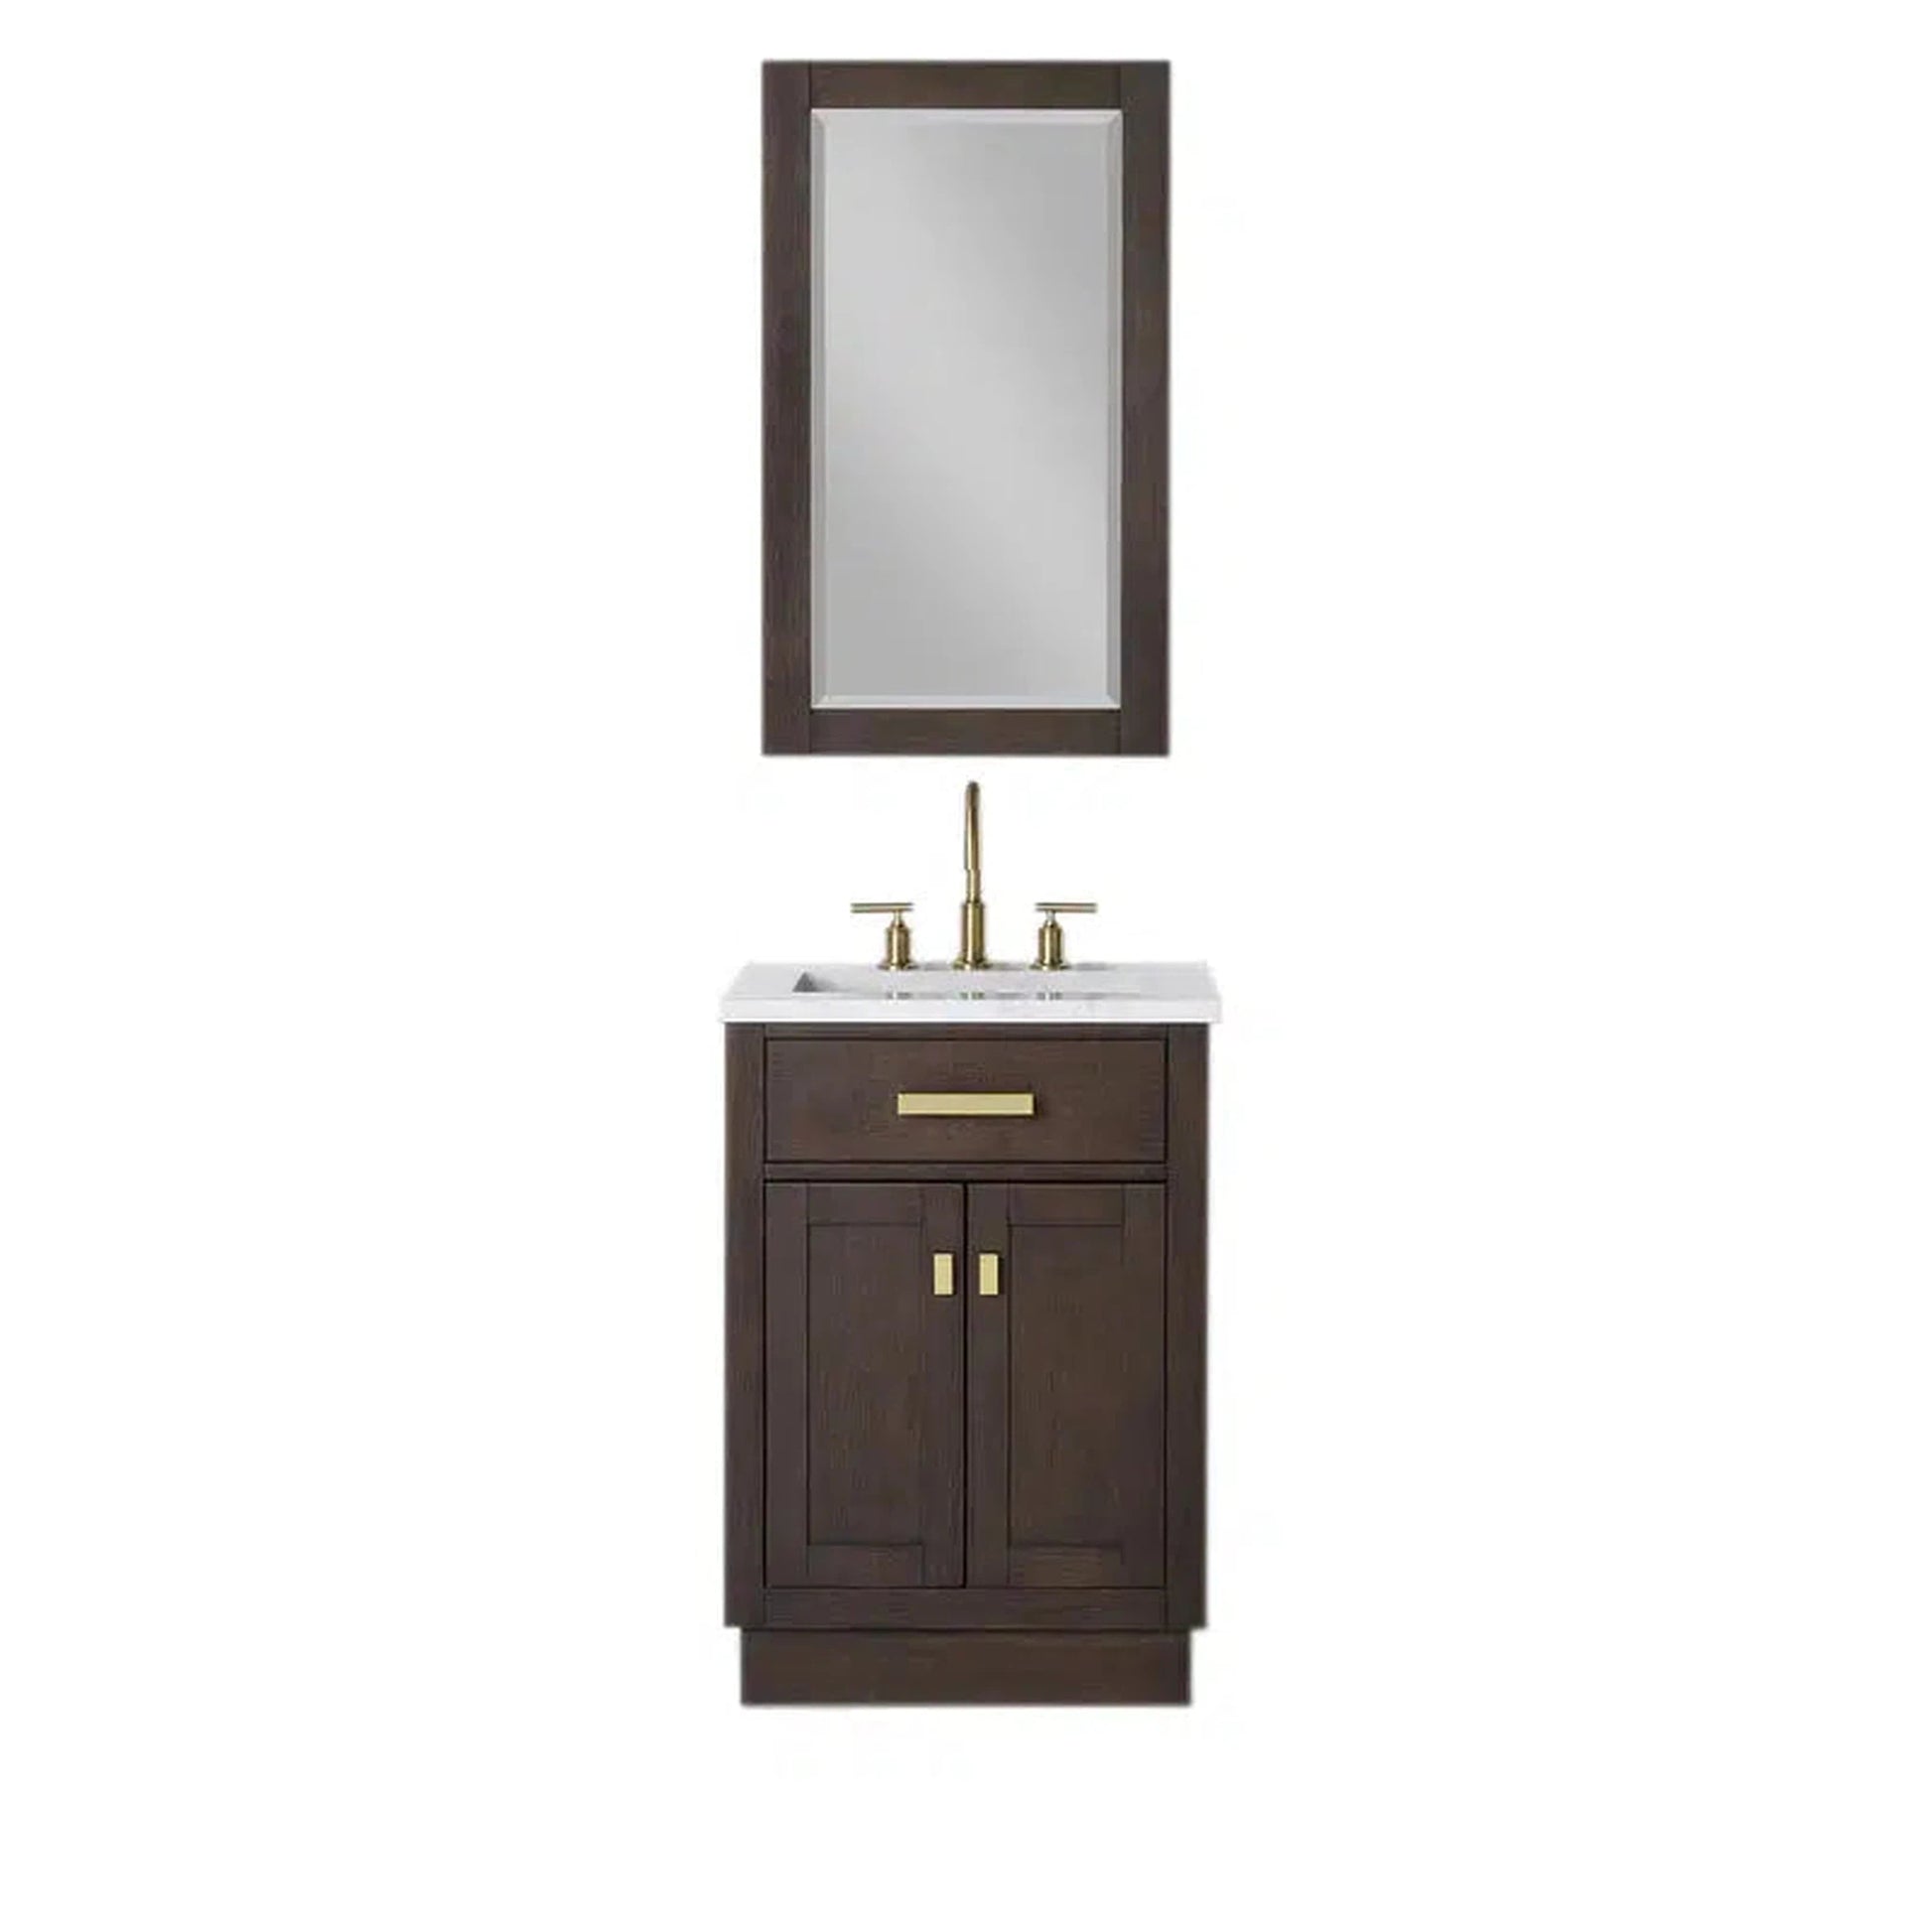 Water Creation Chestnut 24" Single Sink Carrara White Marble Countertop Vanity In Brown Oak with Grooseneck Faucet and Mirror